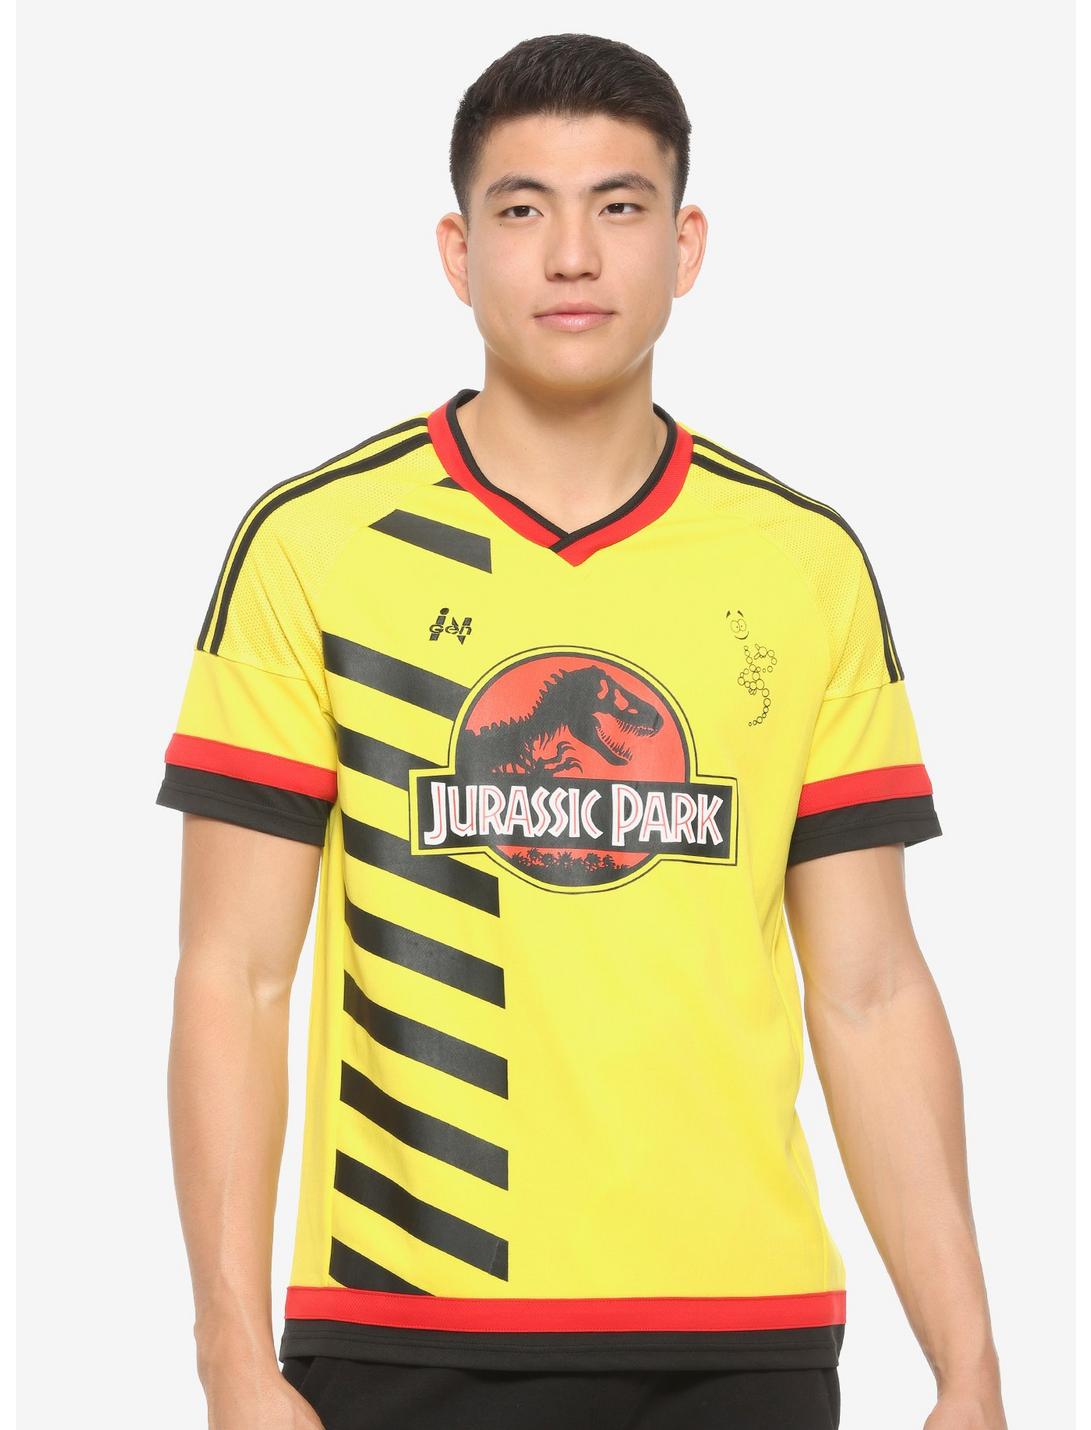 Jurassic Park Striped Jersey - BoxLunch Exclusive, YELLOW, hi-res